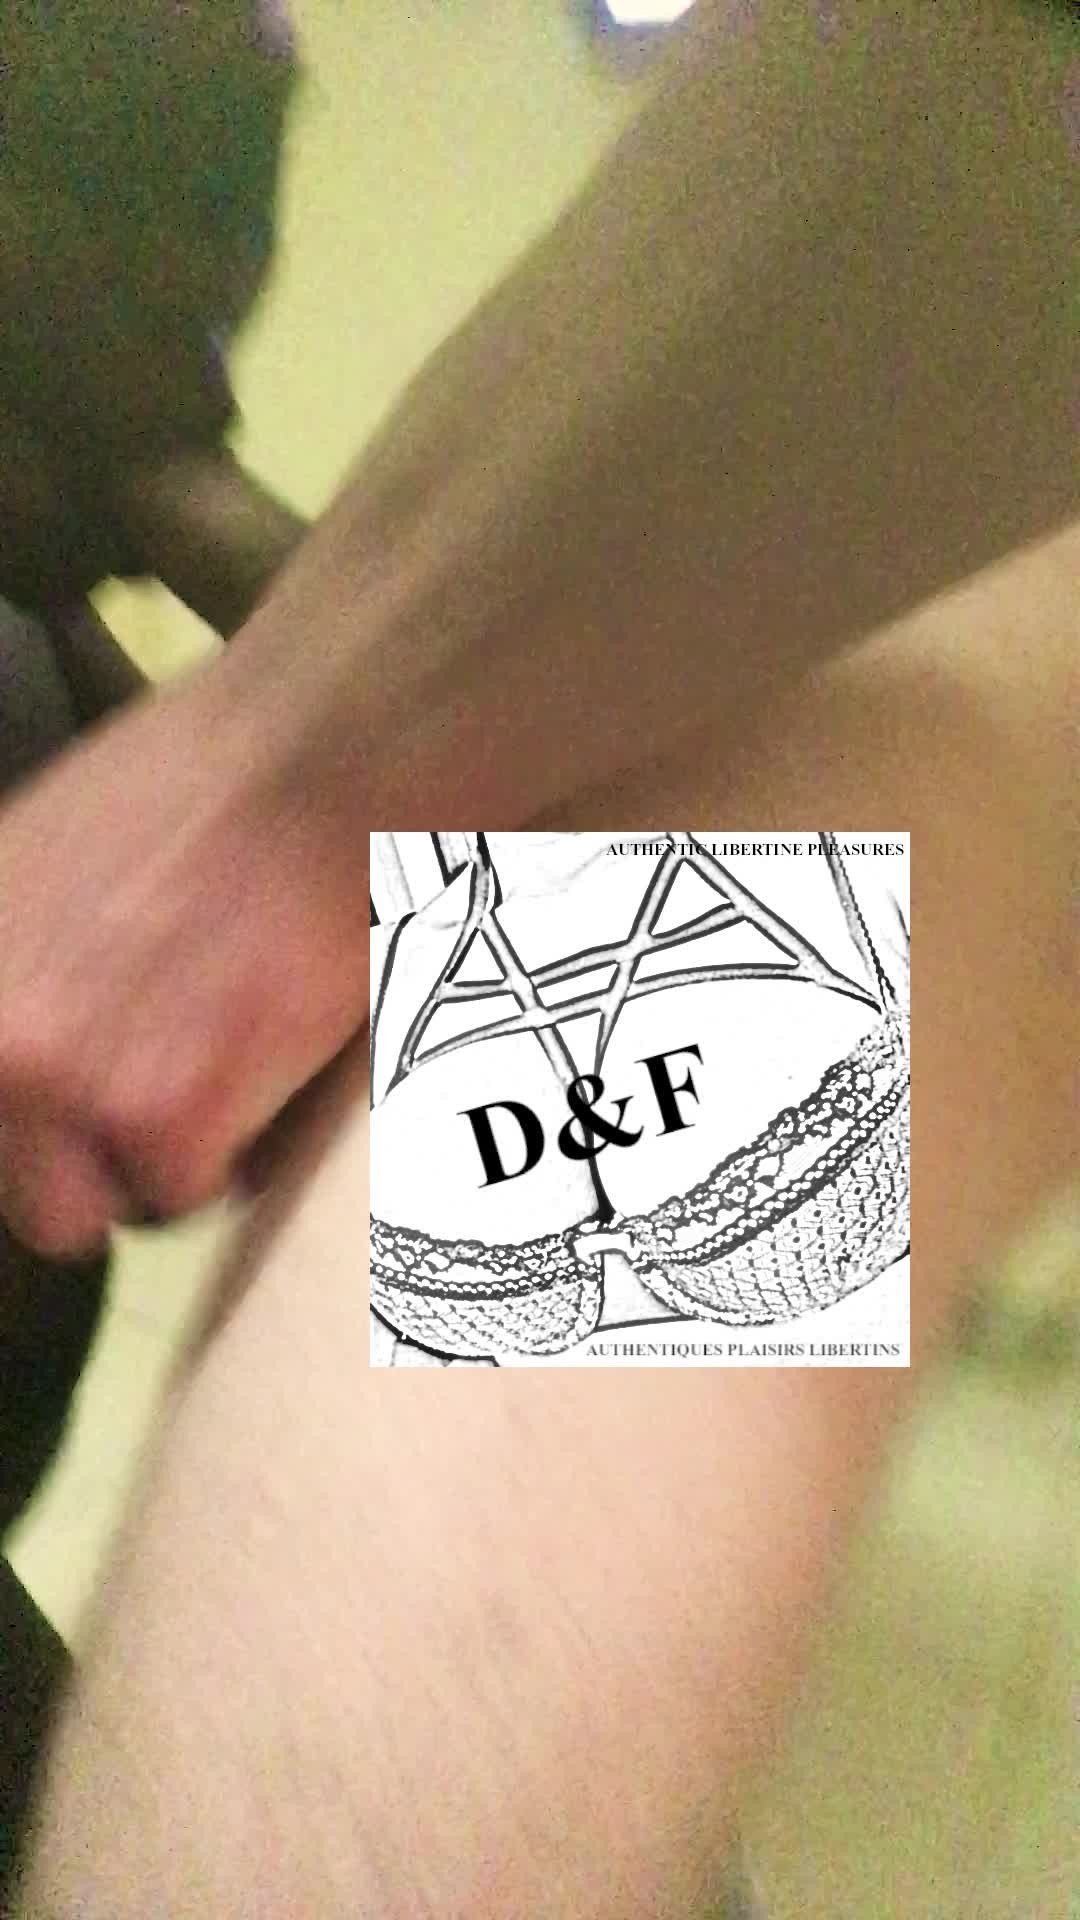 Video post by D&F